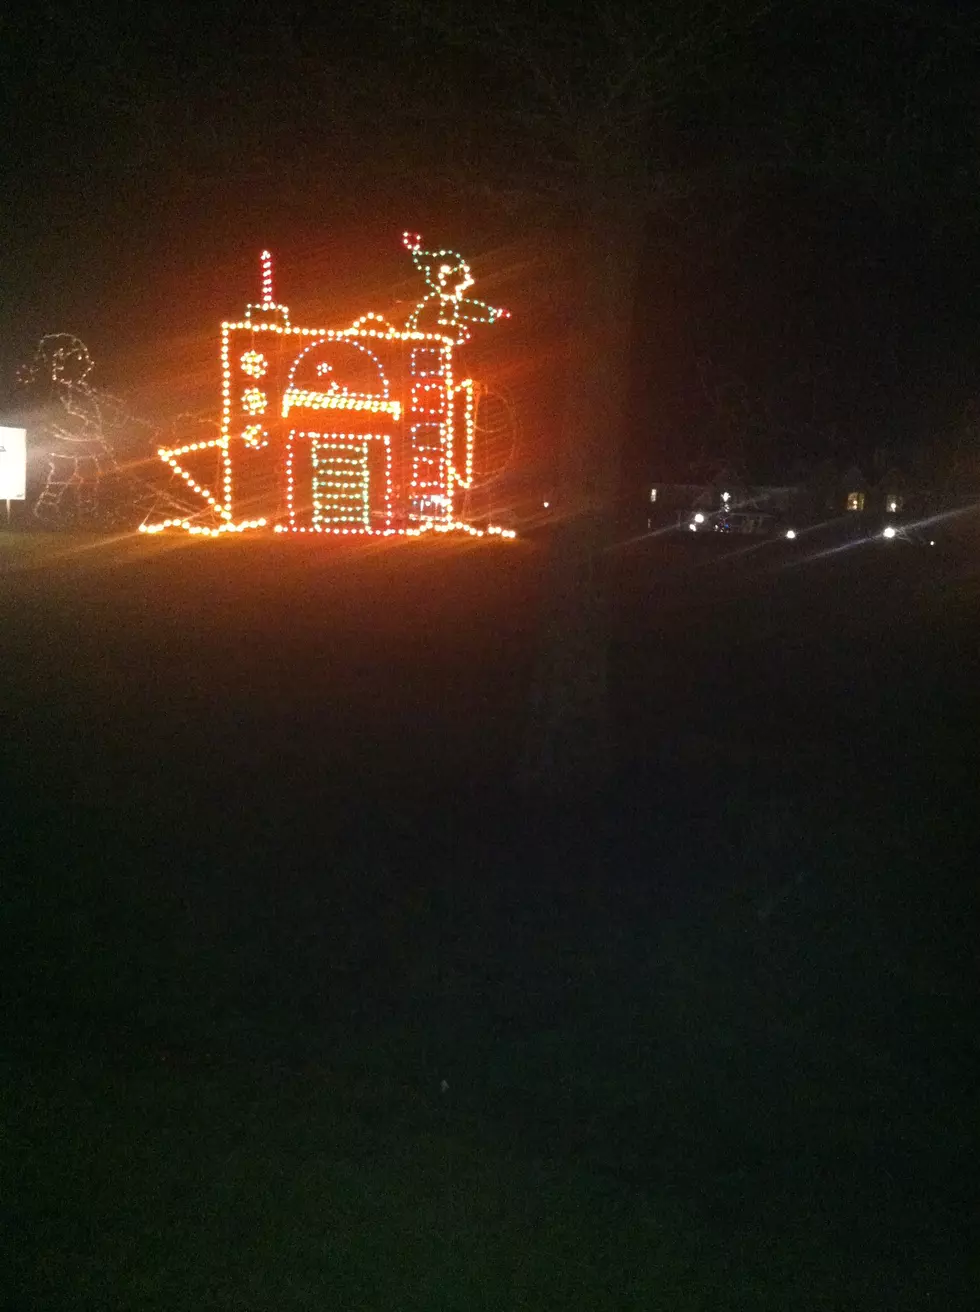 RCIL&#8217;s &#8220;Wonderland Of Lights 2013&#8243;-Three Reasons Why You Should Go See It